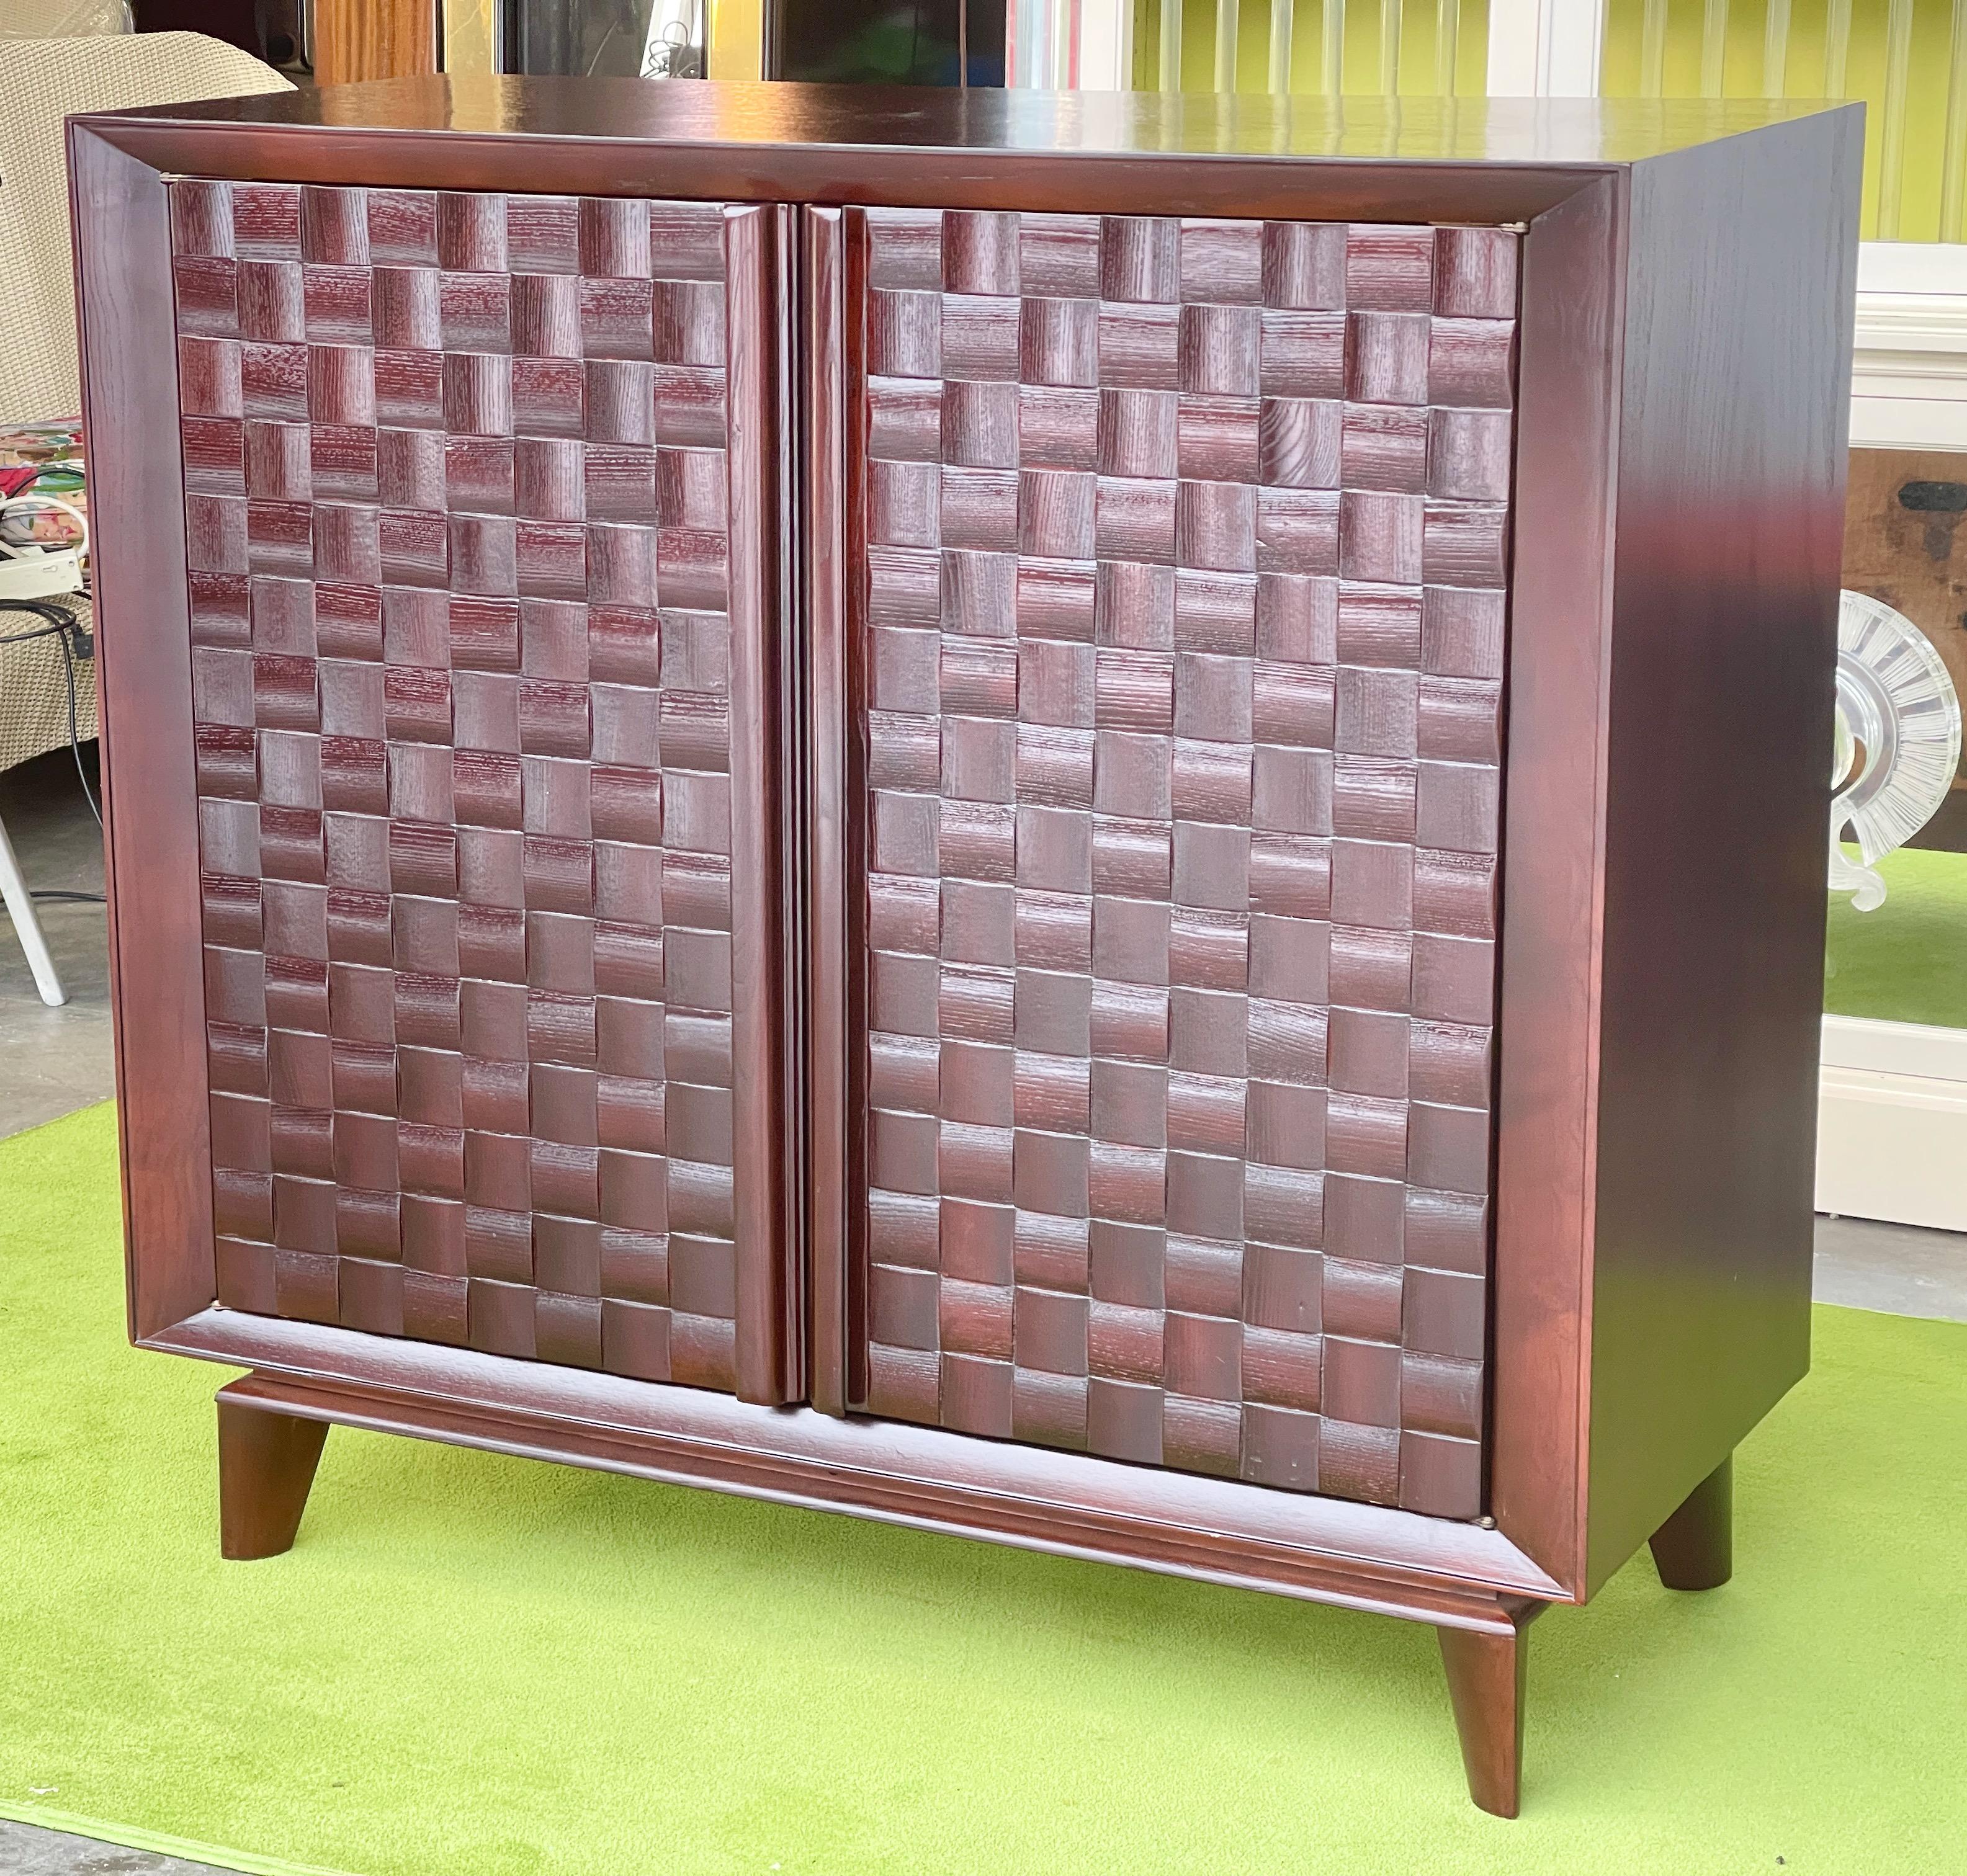 Paul Laszlo for Brown Saltman (signed) basket weave double door cabinet in American white oak newly refinished in dark walnut. 
Originally this cabinet was blonde and contained GE Musaphonic hi-fi equipment with a pull-put turntable drawer and